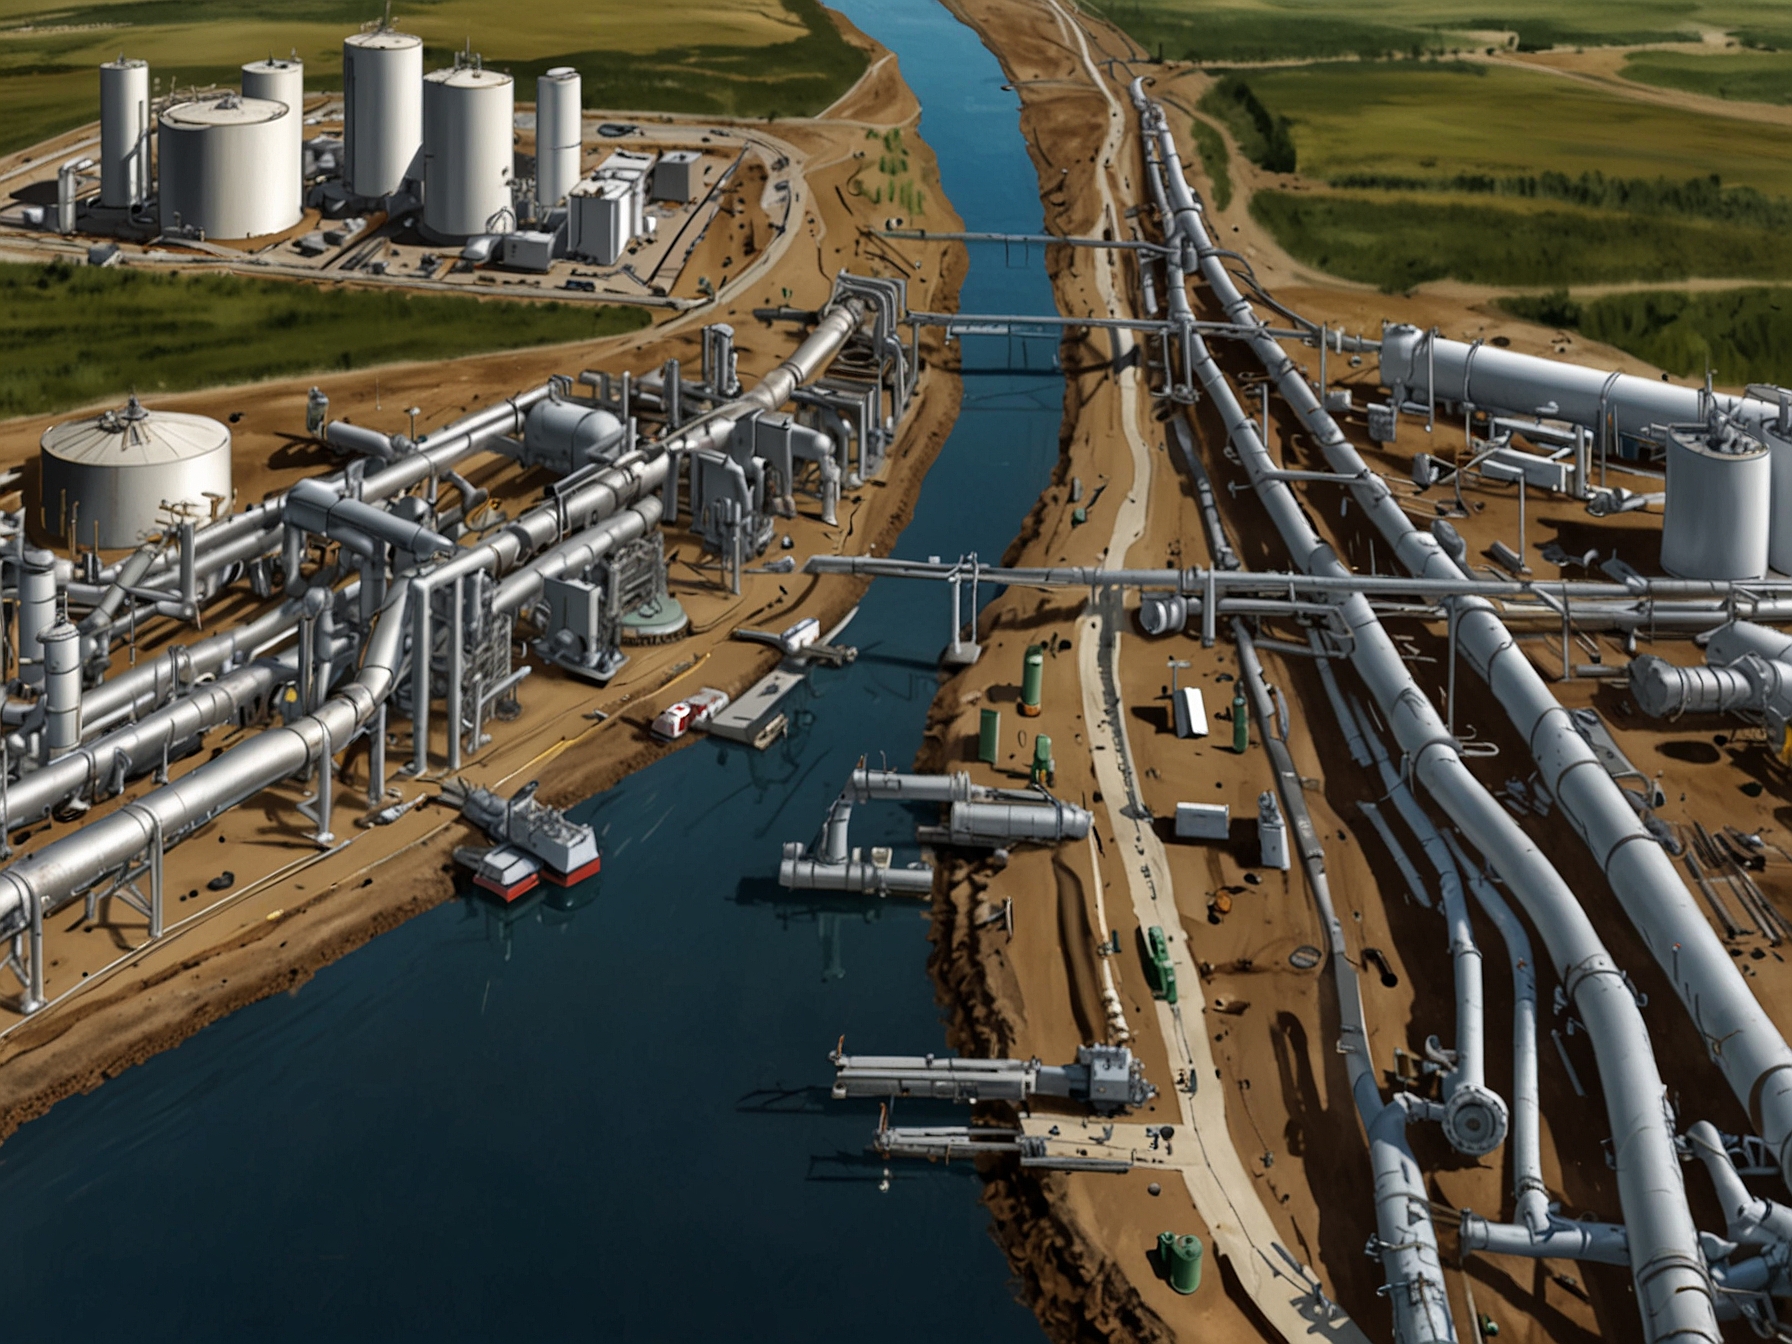 An overhead view of Kinder Morgan’s extensive network of pipelines and storage terminals, illustrating the company’s significant infrastructure in the midstream energy sector.